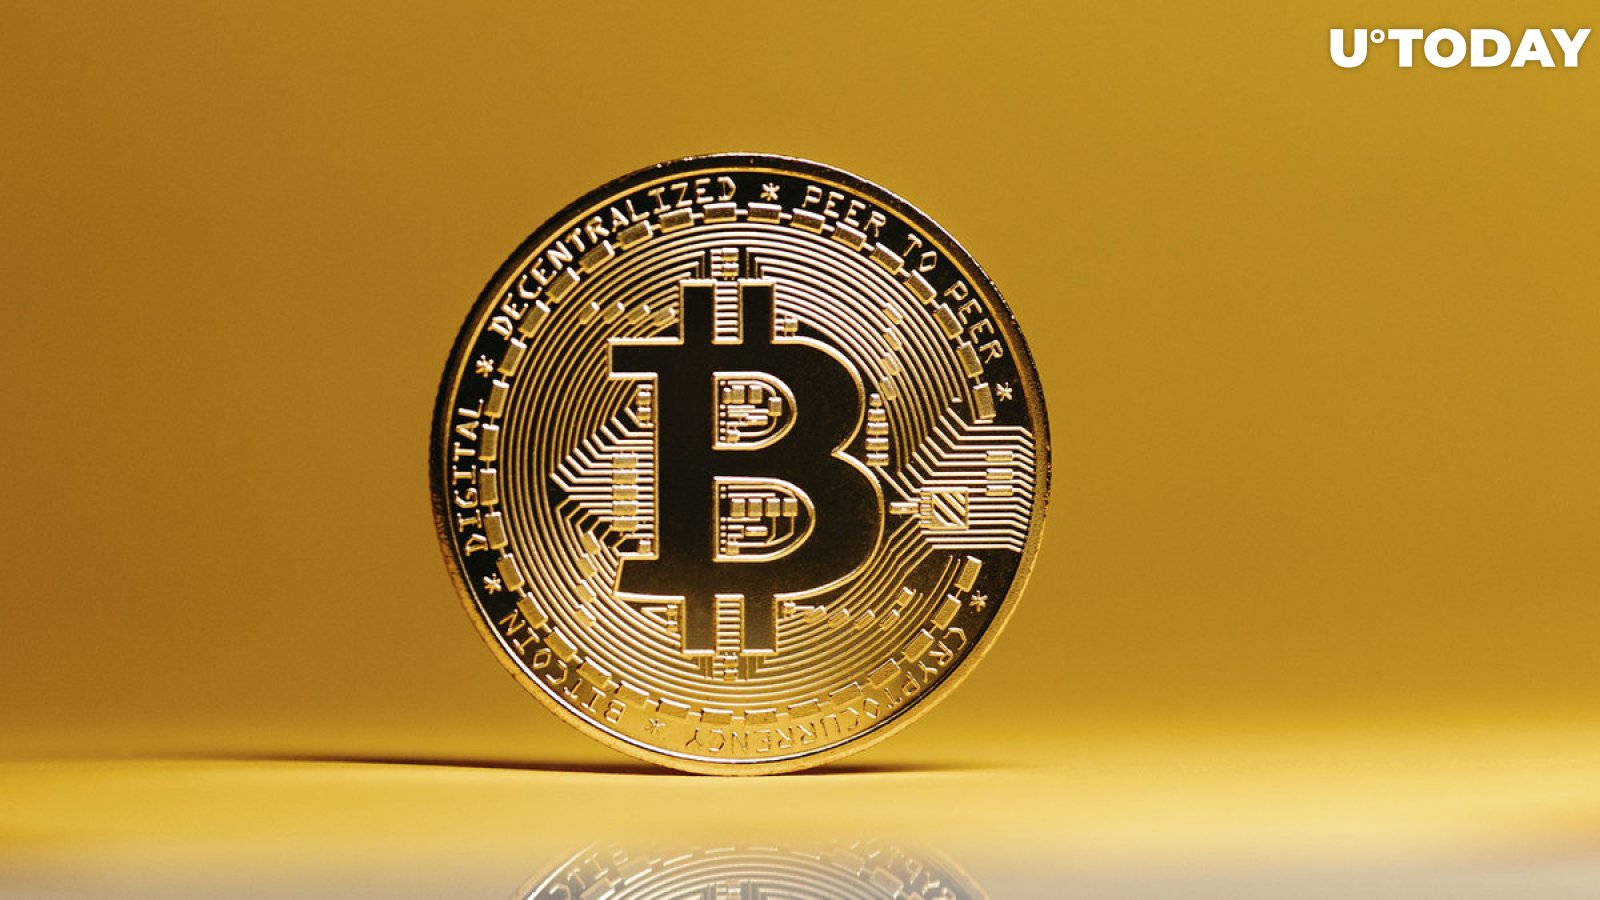 Bitcoin (BTC) May Be in for Short-Term Price Correction, Analyst Warns